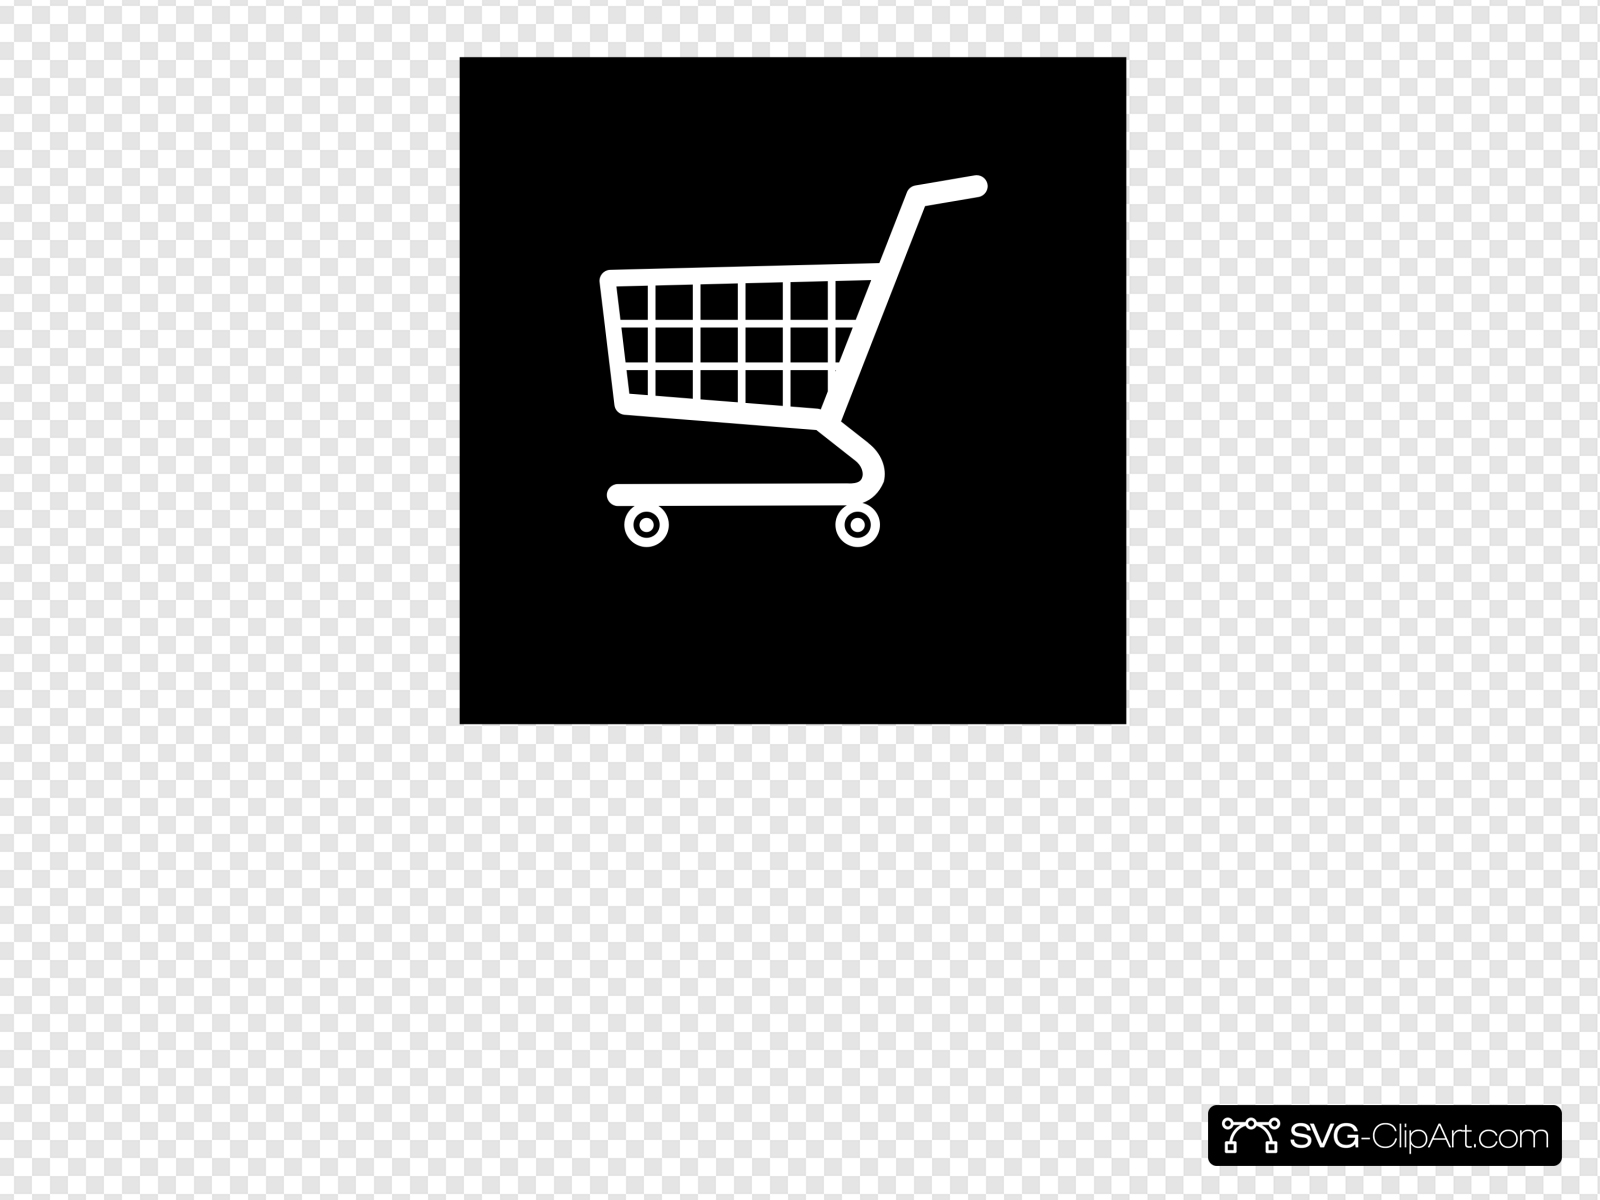 White Shopping Cart Clip art, Icon and SVG